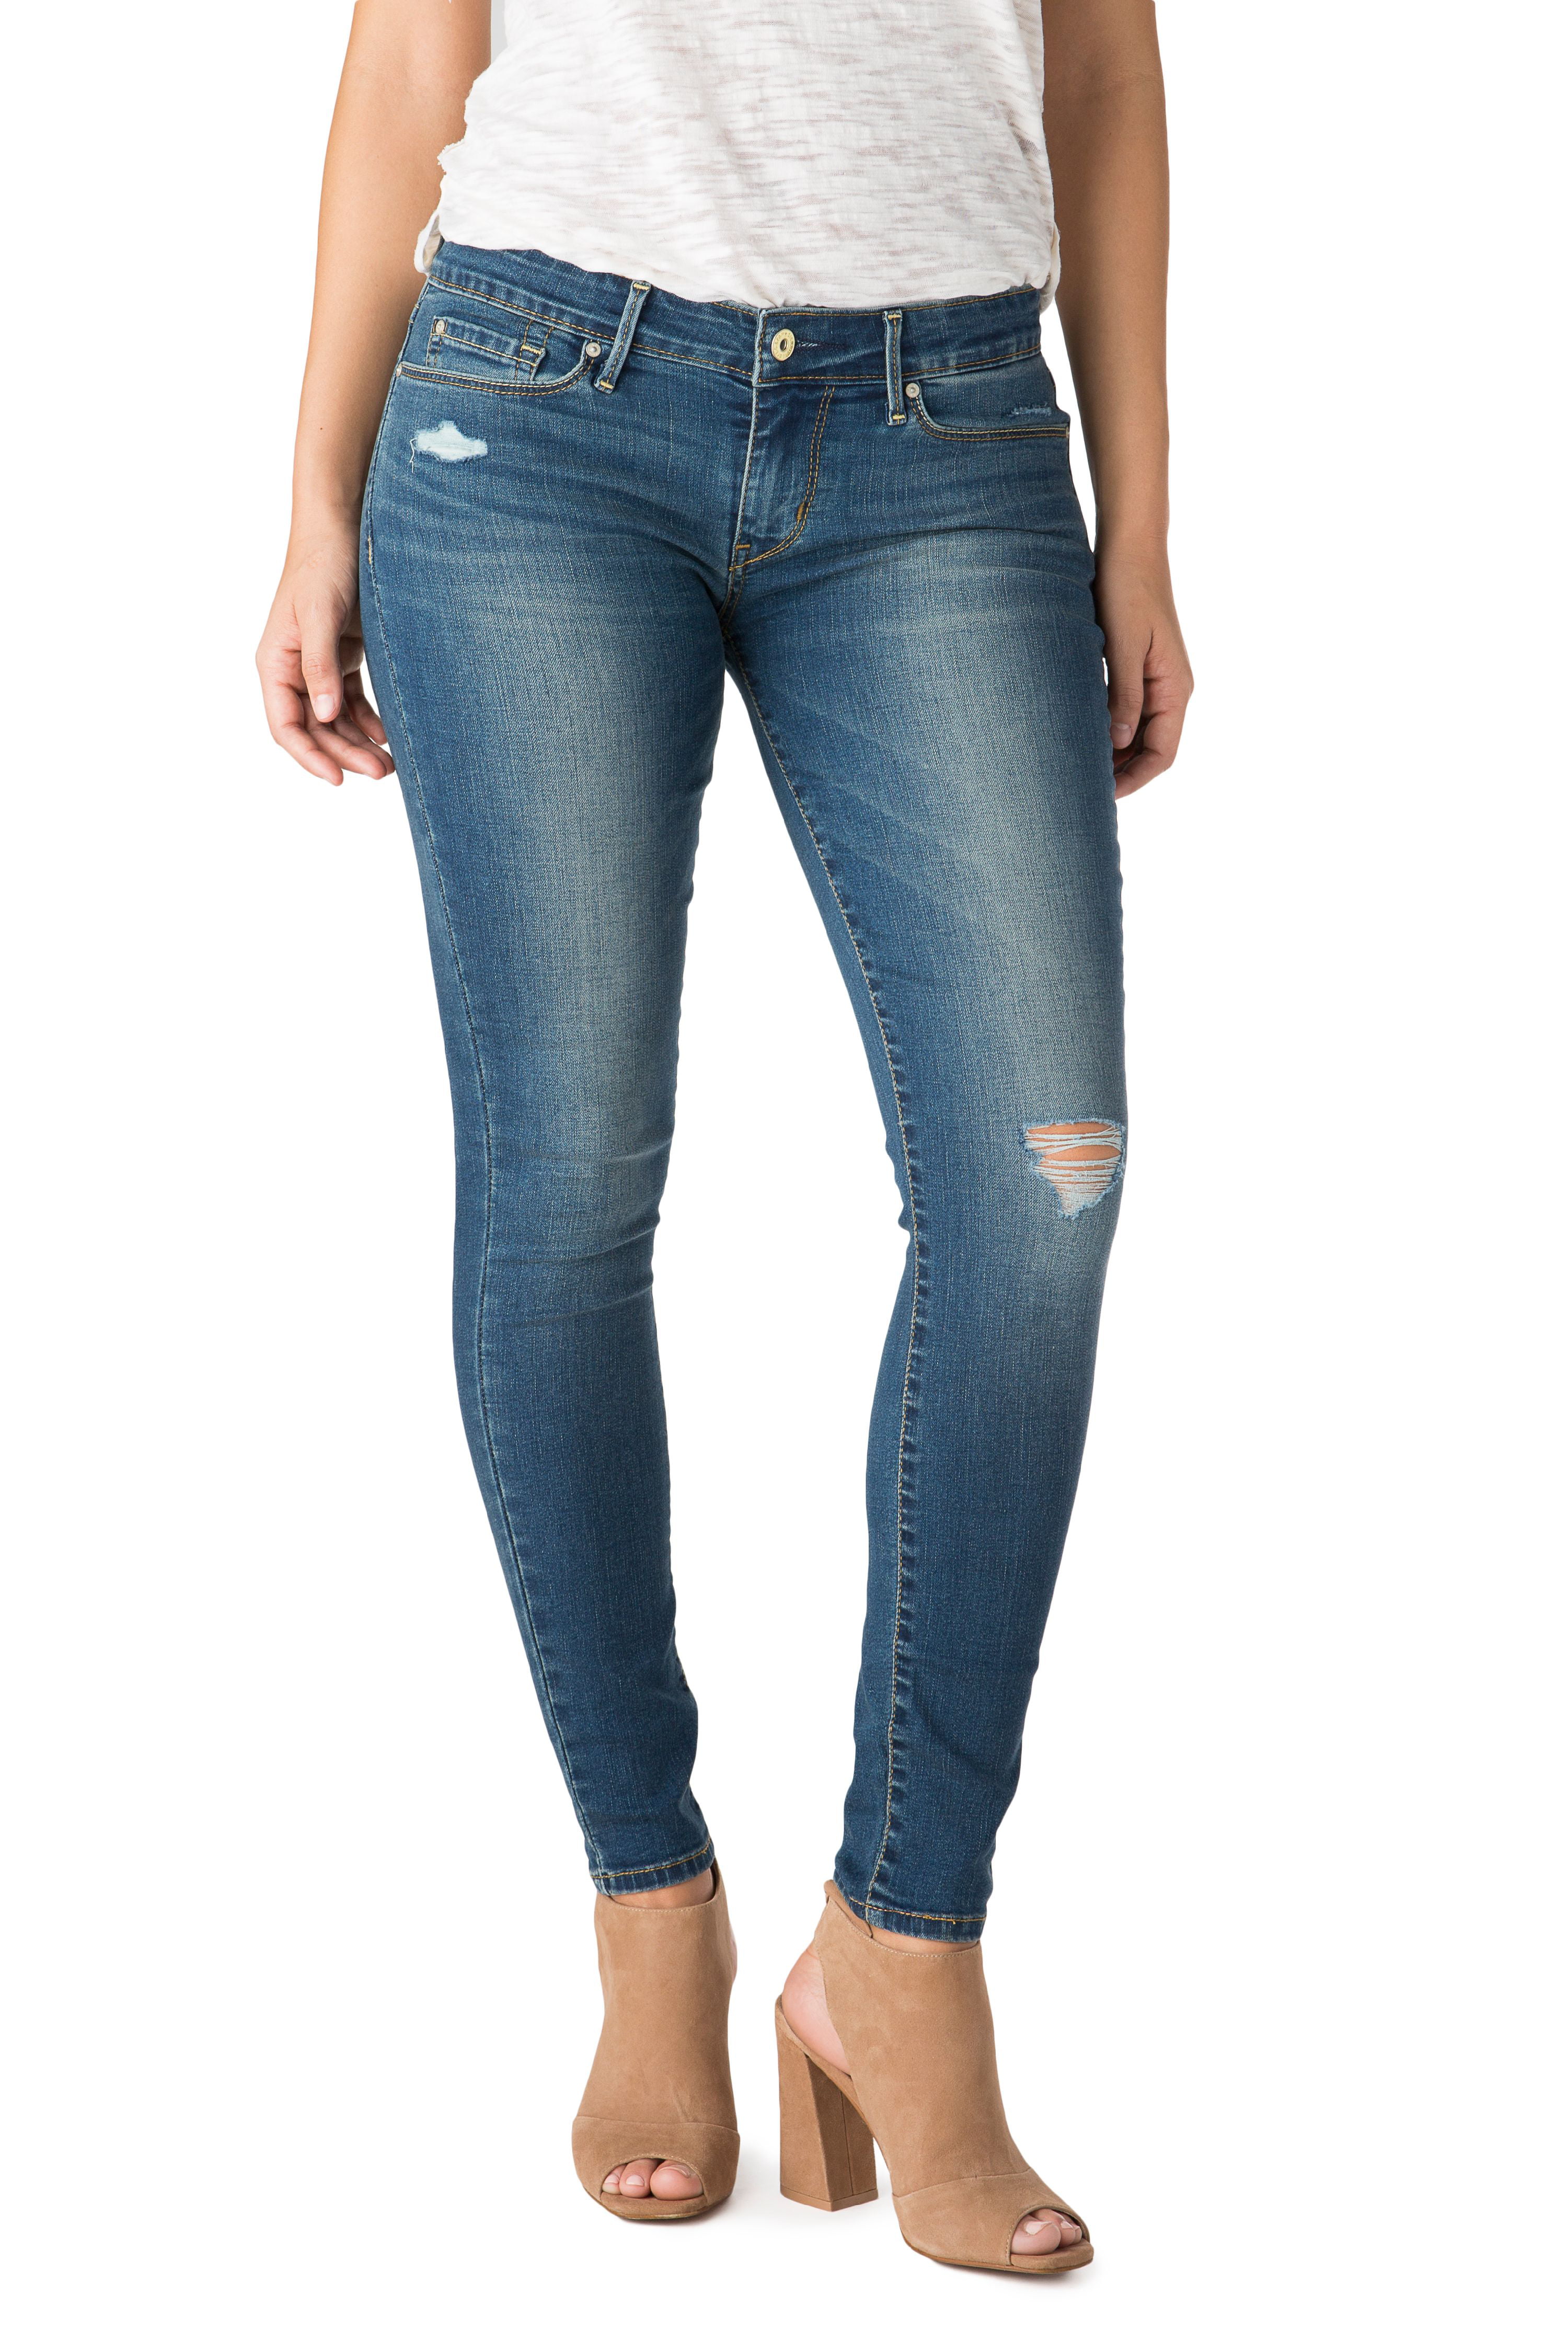 Signature by Levi Strauss & Co. Women's Low Rise Jeggings 